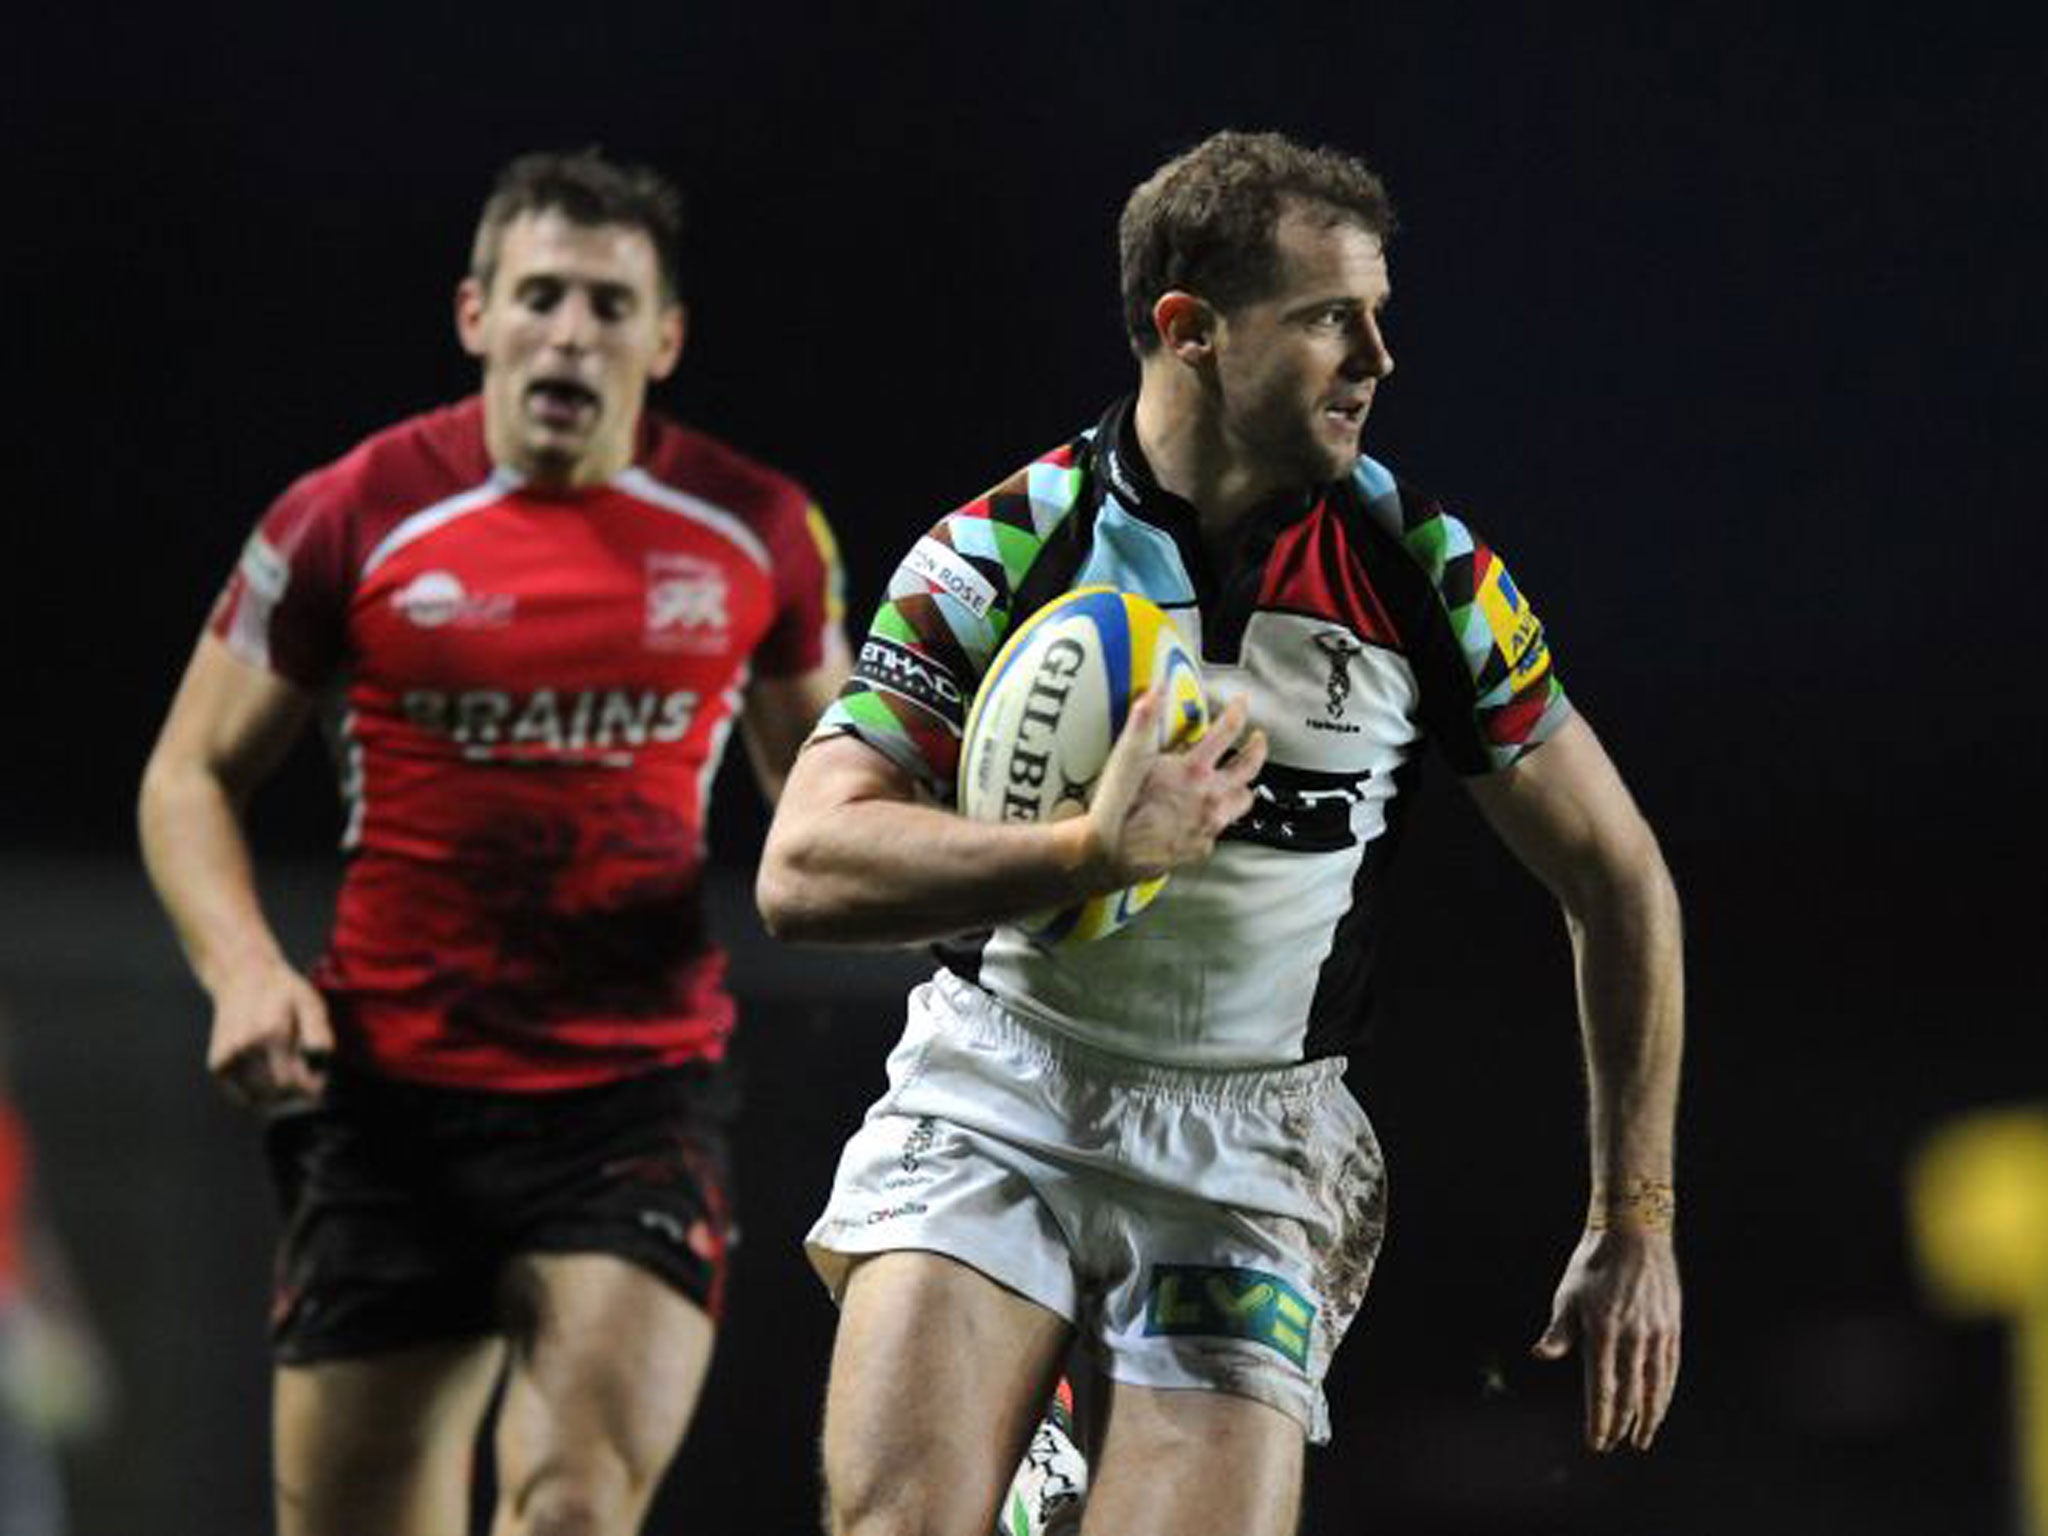 Nick Evans goes through to score Harlequins’ fourth try